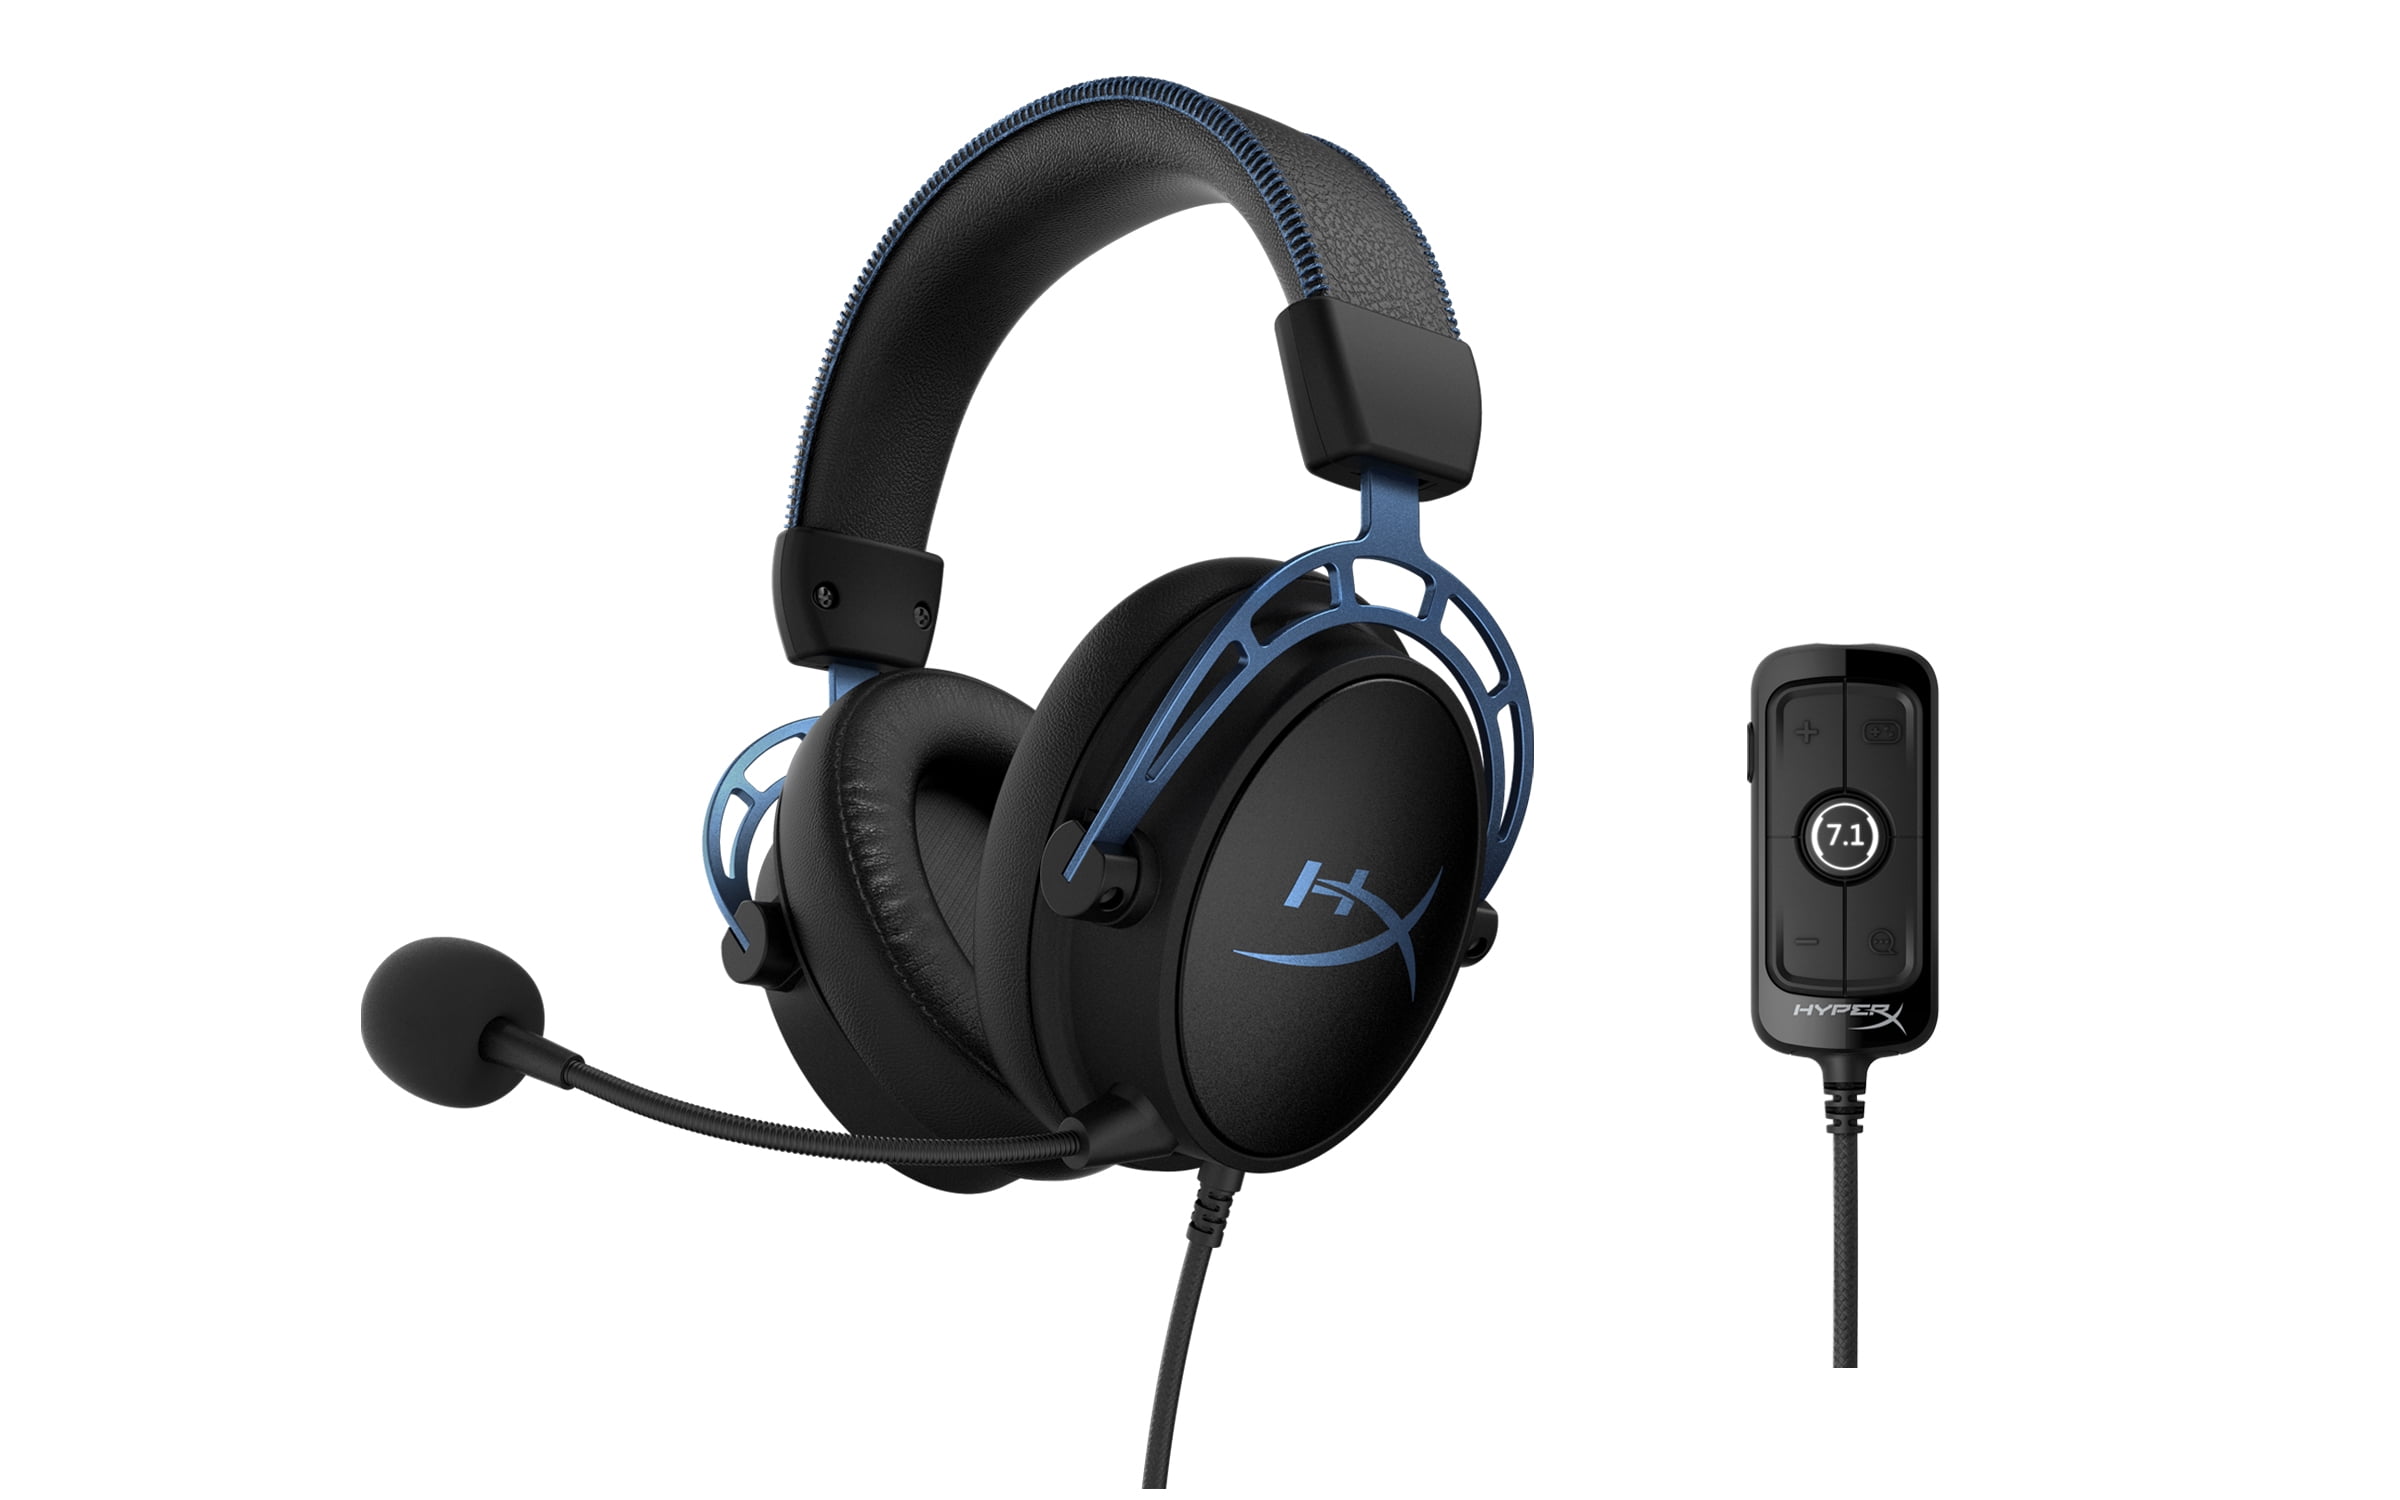 HyperX Cloud Alpha S - Gaming Headset, for PC, 7.1 Surround Sound, Adjustable Bass, Dual Chamber Drivers, Chat Mixer, Leatherette, Memory Foam, and Noise Cancelling Microphone - Walmart.com